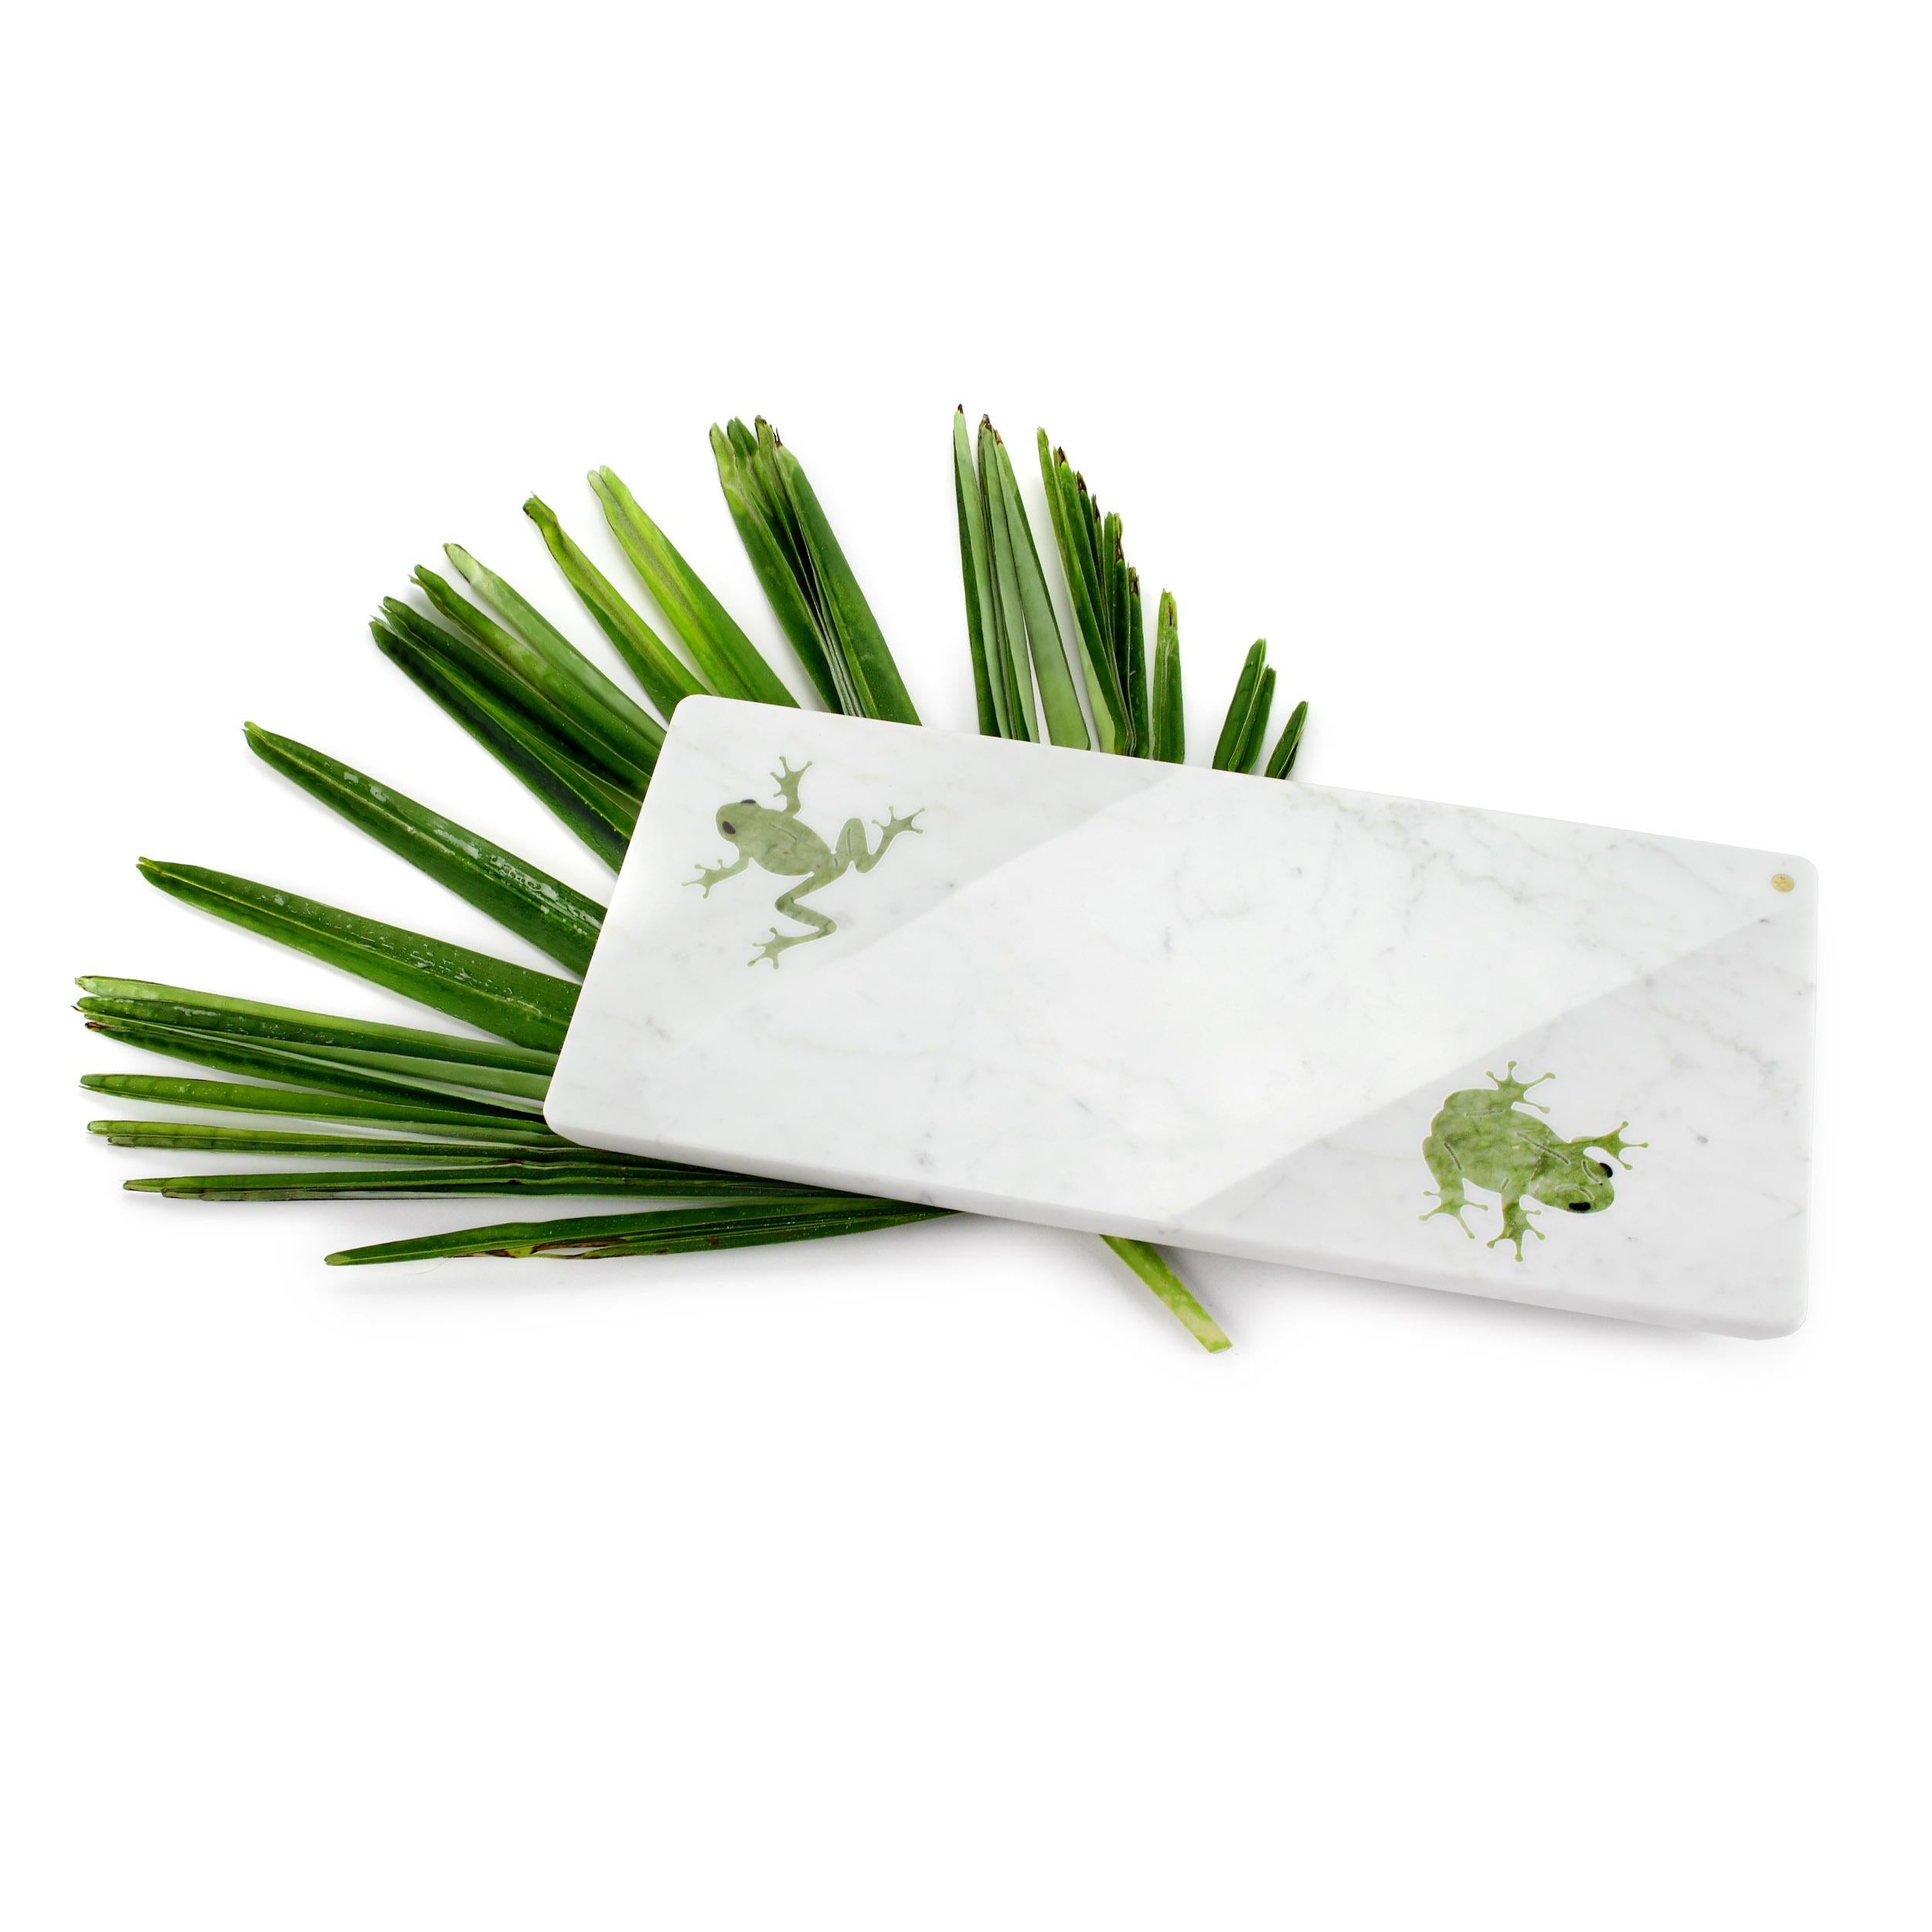 Centerpiece / Serving plate in white Carrara marble with green Ming marble inlay.

Dimensions: Big L 45, W 20.5, H 1.5 cm
Also available: Medium L 45, W 12, H 1.5 cm

100% Hand made in Italy.

Marble is a natural material, every piece is unique as